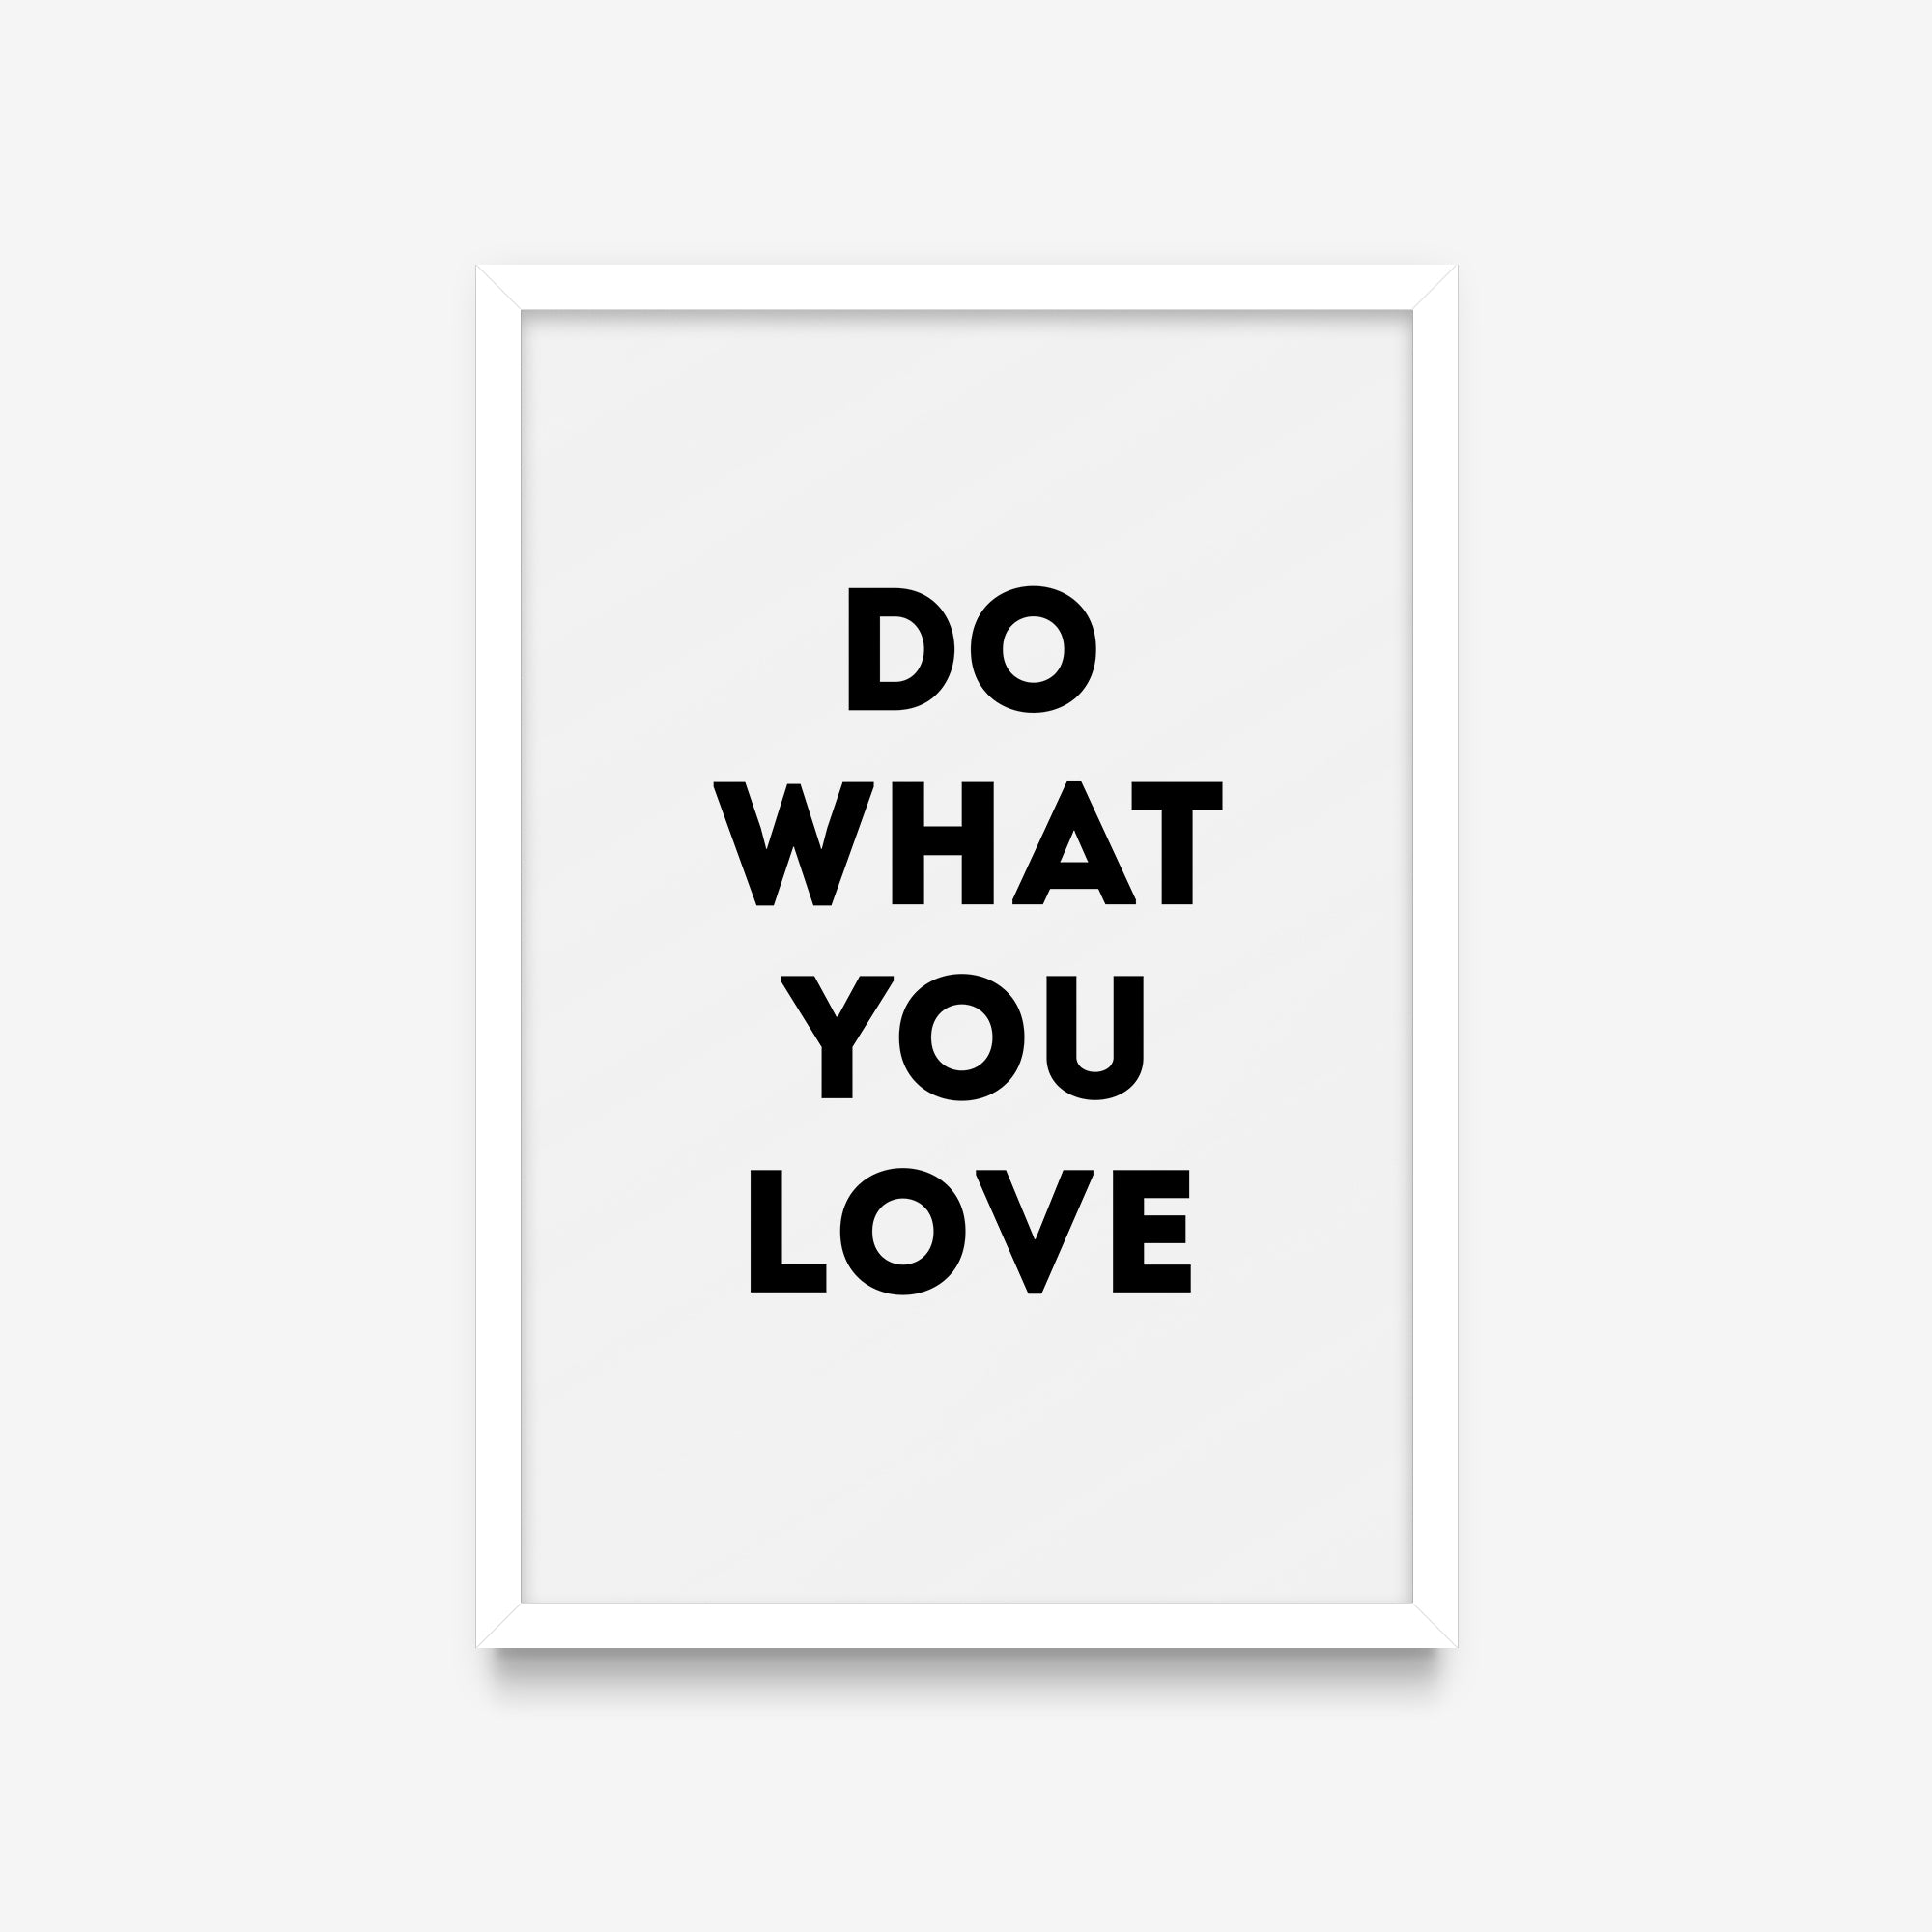 Frases - Do what you love